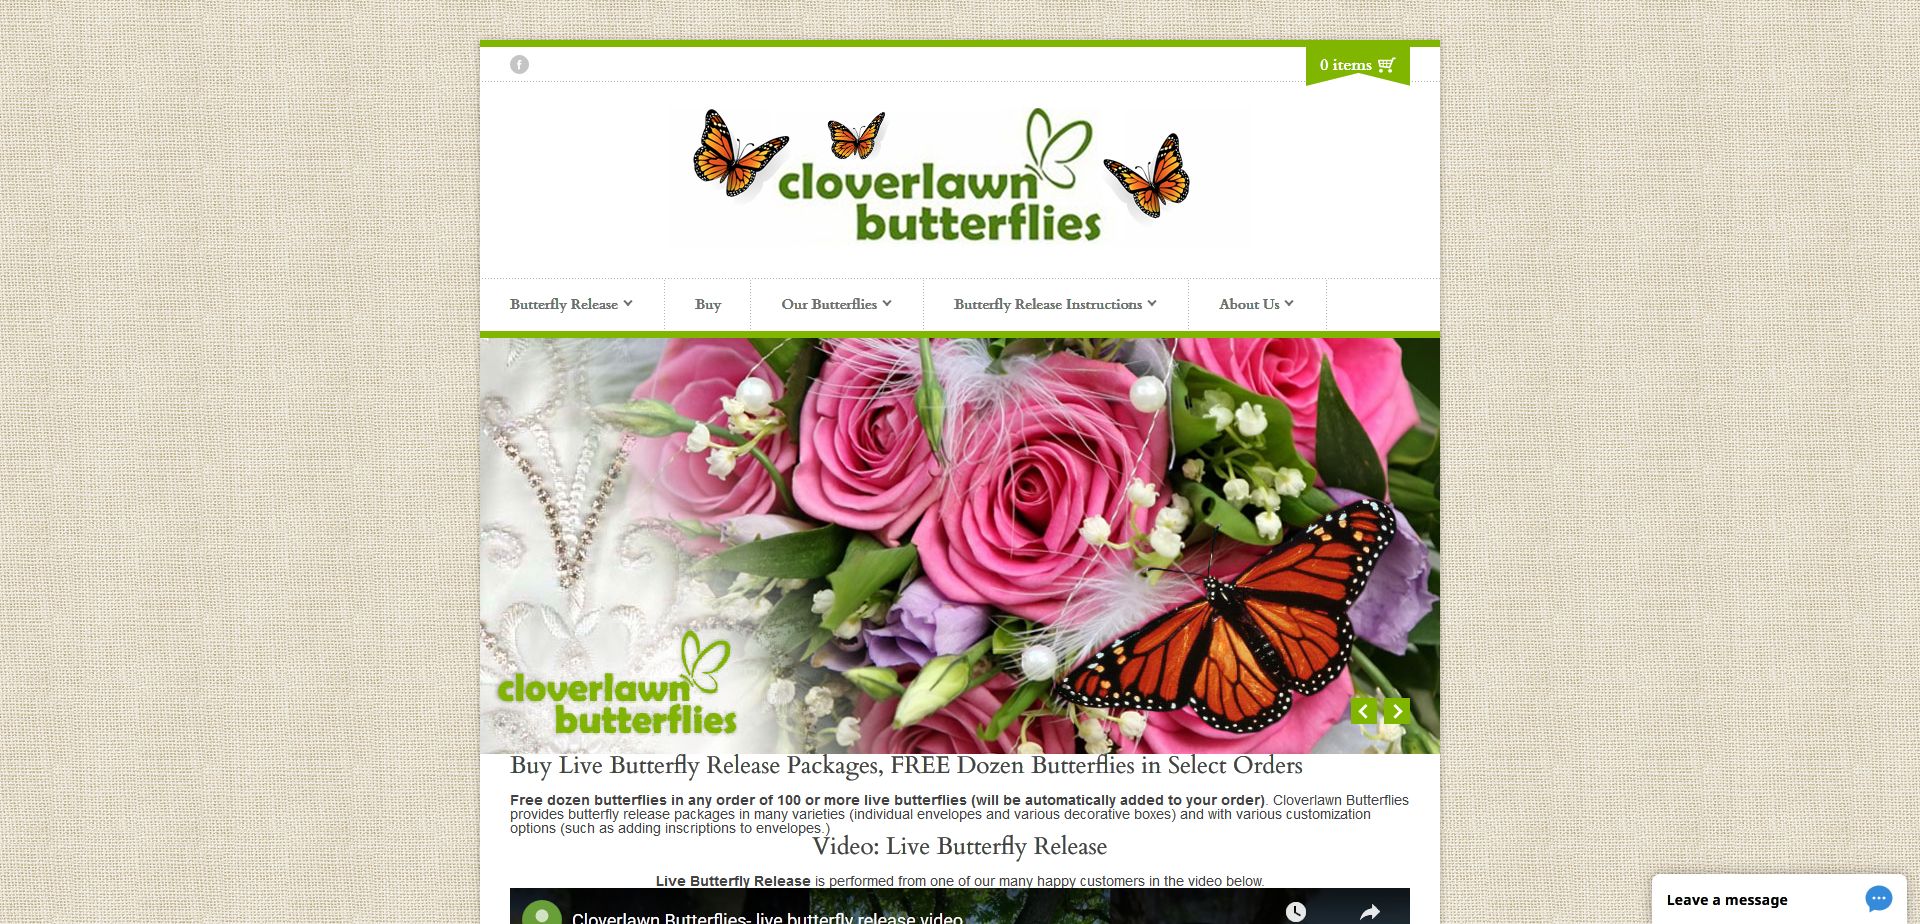 Cloverlawn Butterflies is a Family owned Butterfly Release Company